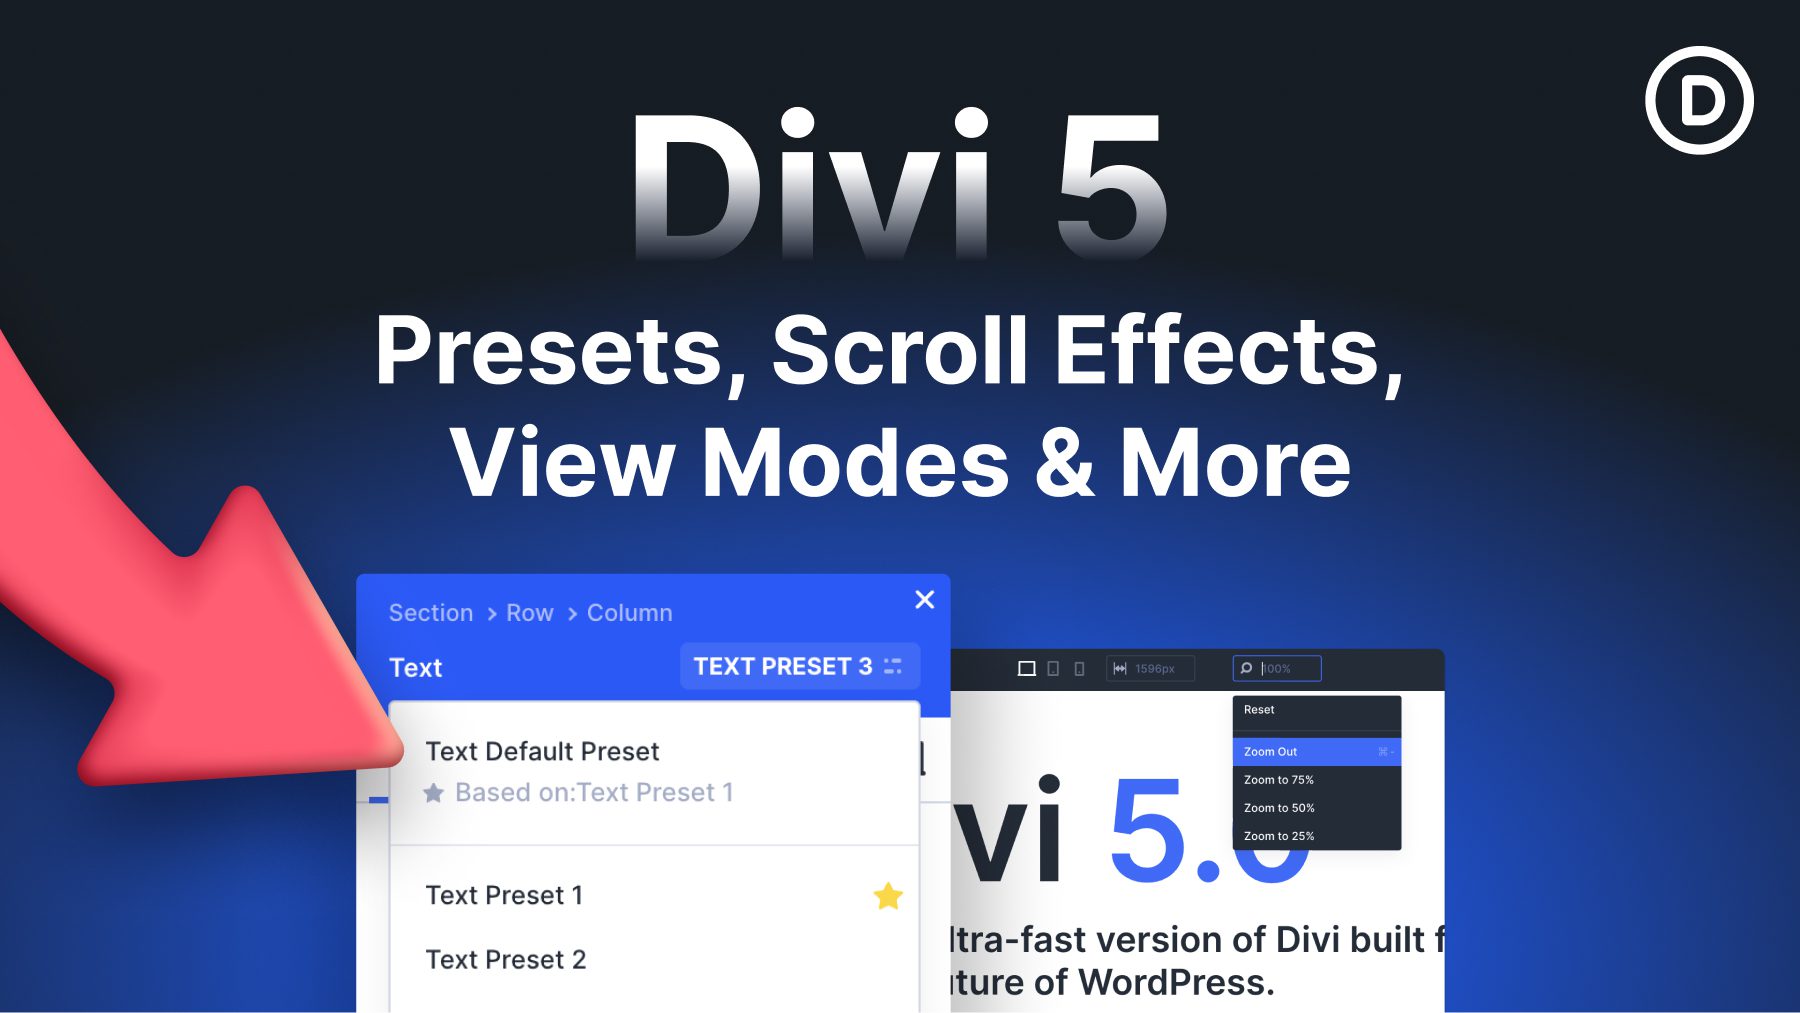 Divi 5 Progress Update: Presets, Scroll Effects, View Modes & More